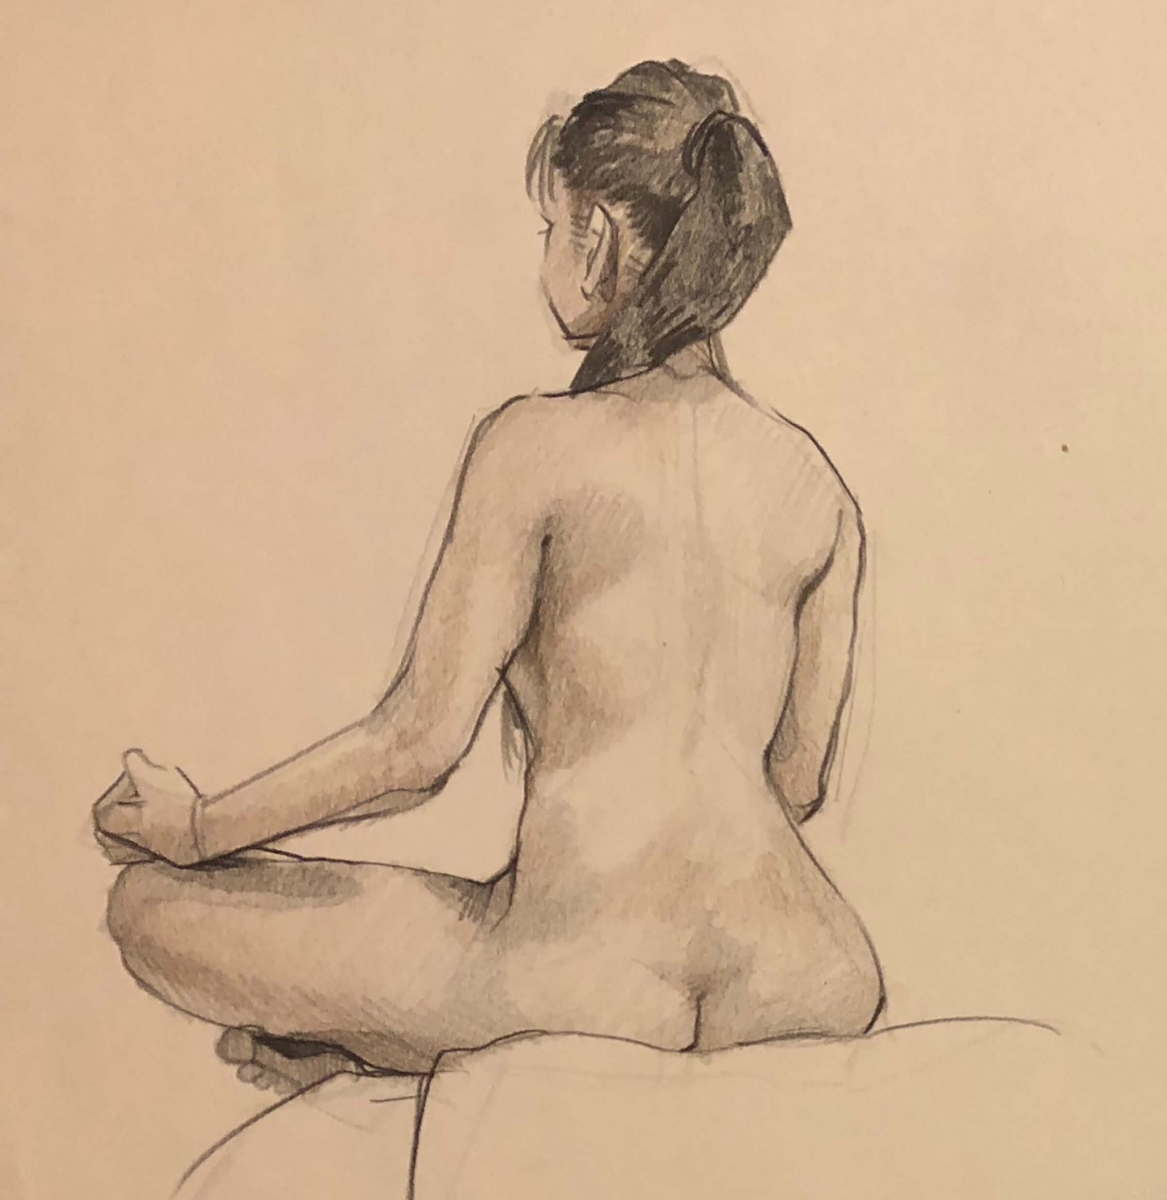 A sketch of a nude woman, sitting with her back to the artist